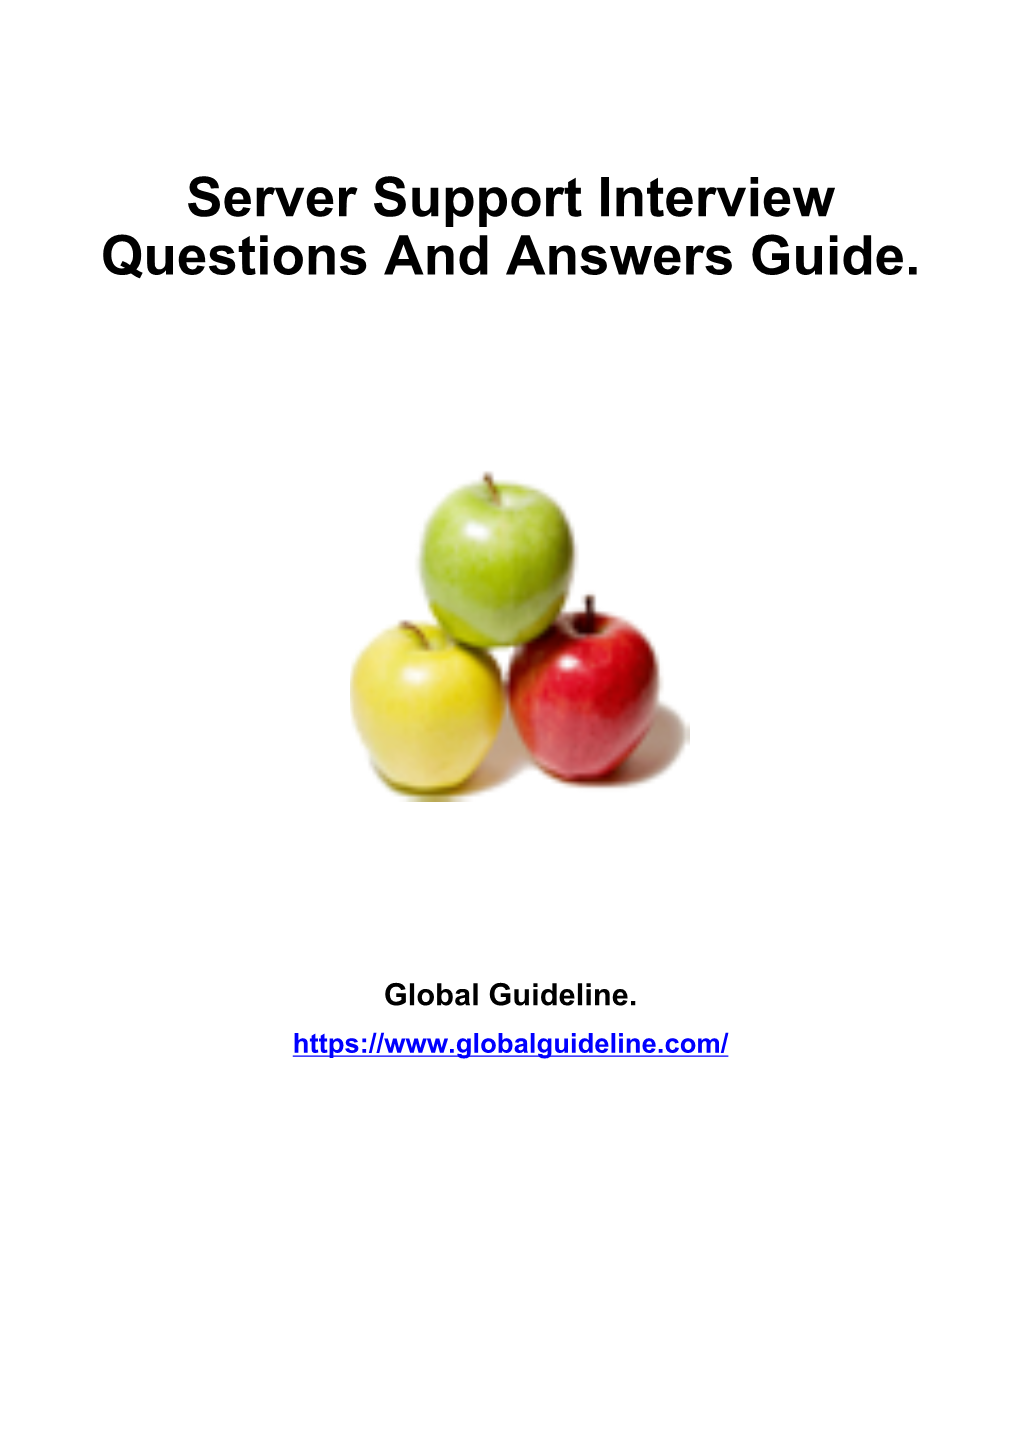 Server Support Interview Questions and Answers Guide